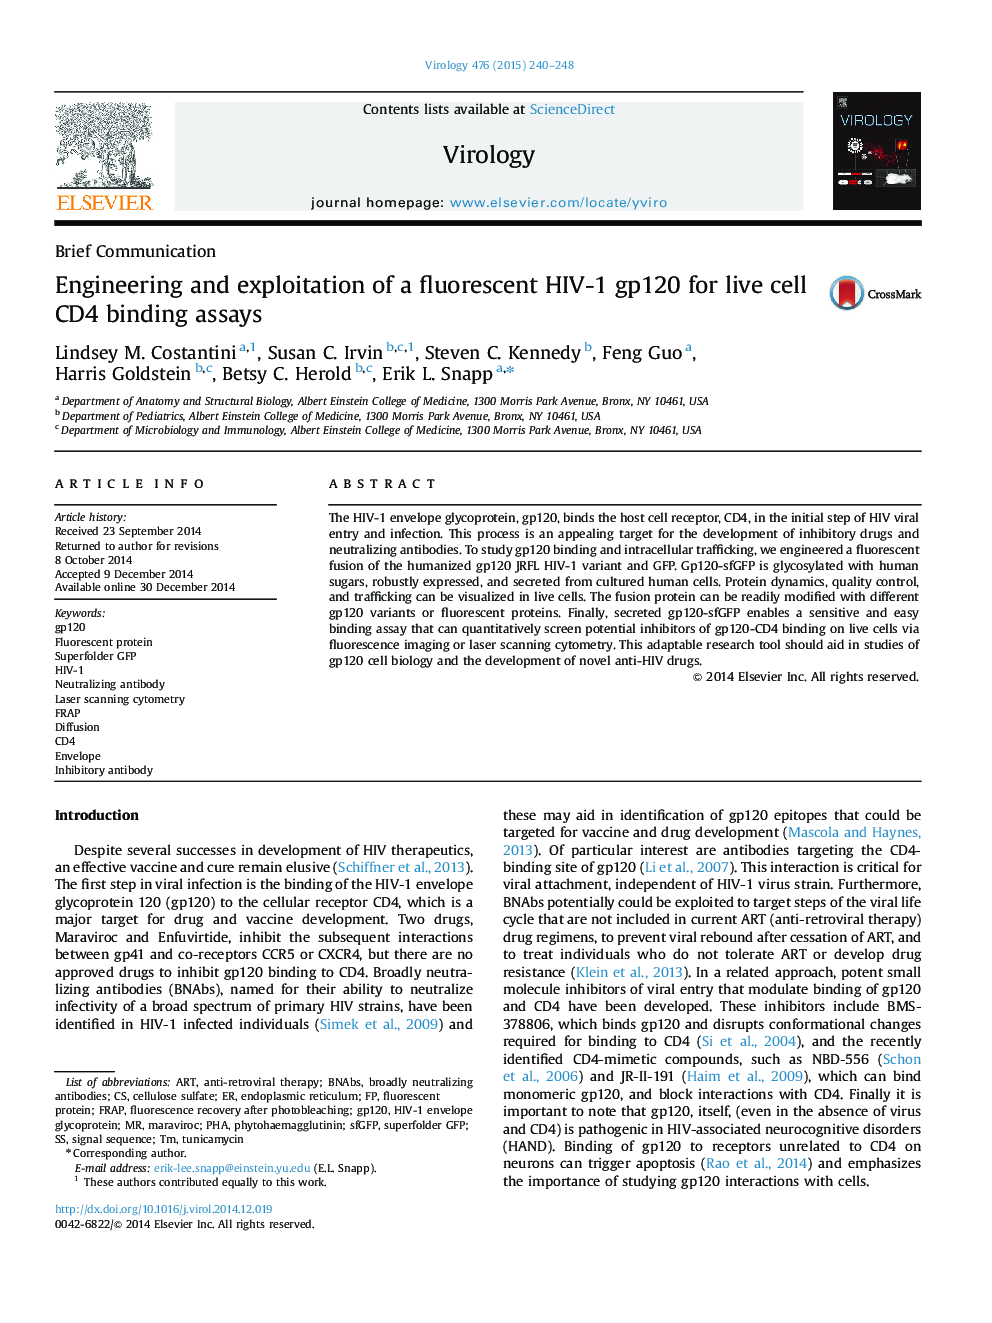 Engineering and exploitation of a fluorescent HIV-1 gp120 for live cell CD4 binding assays